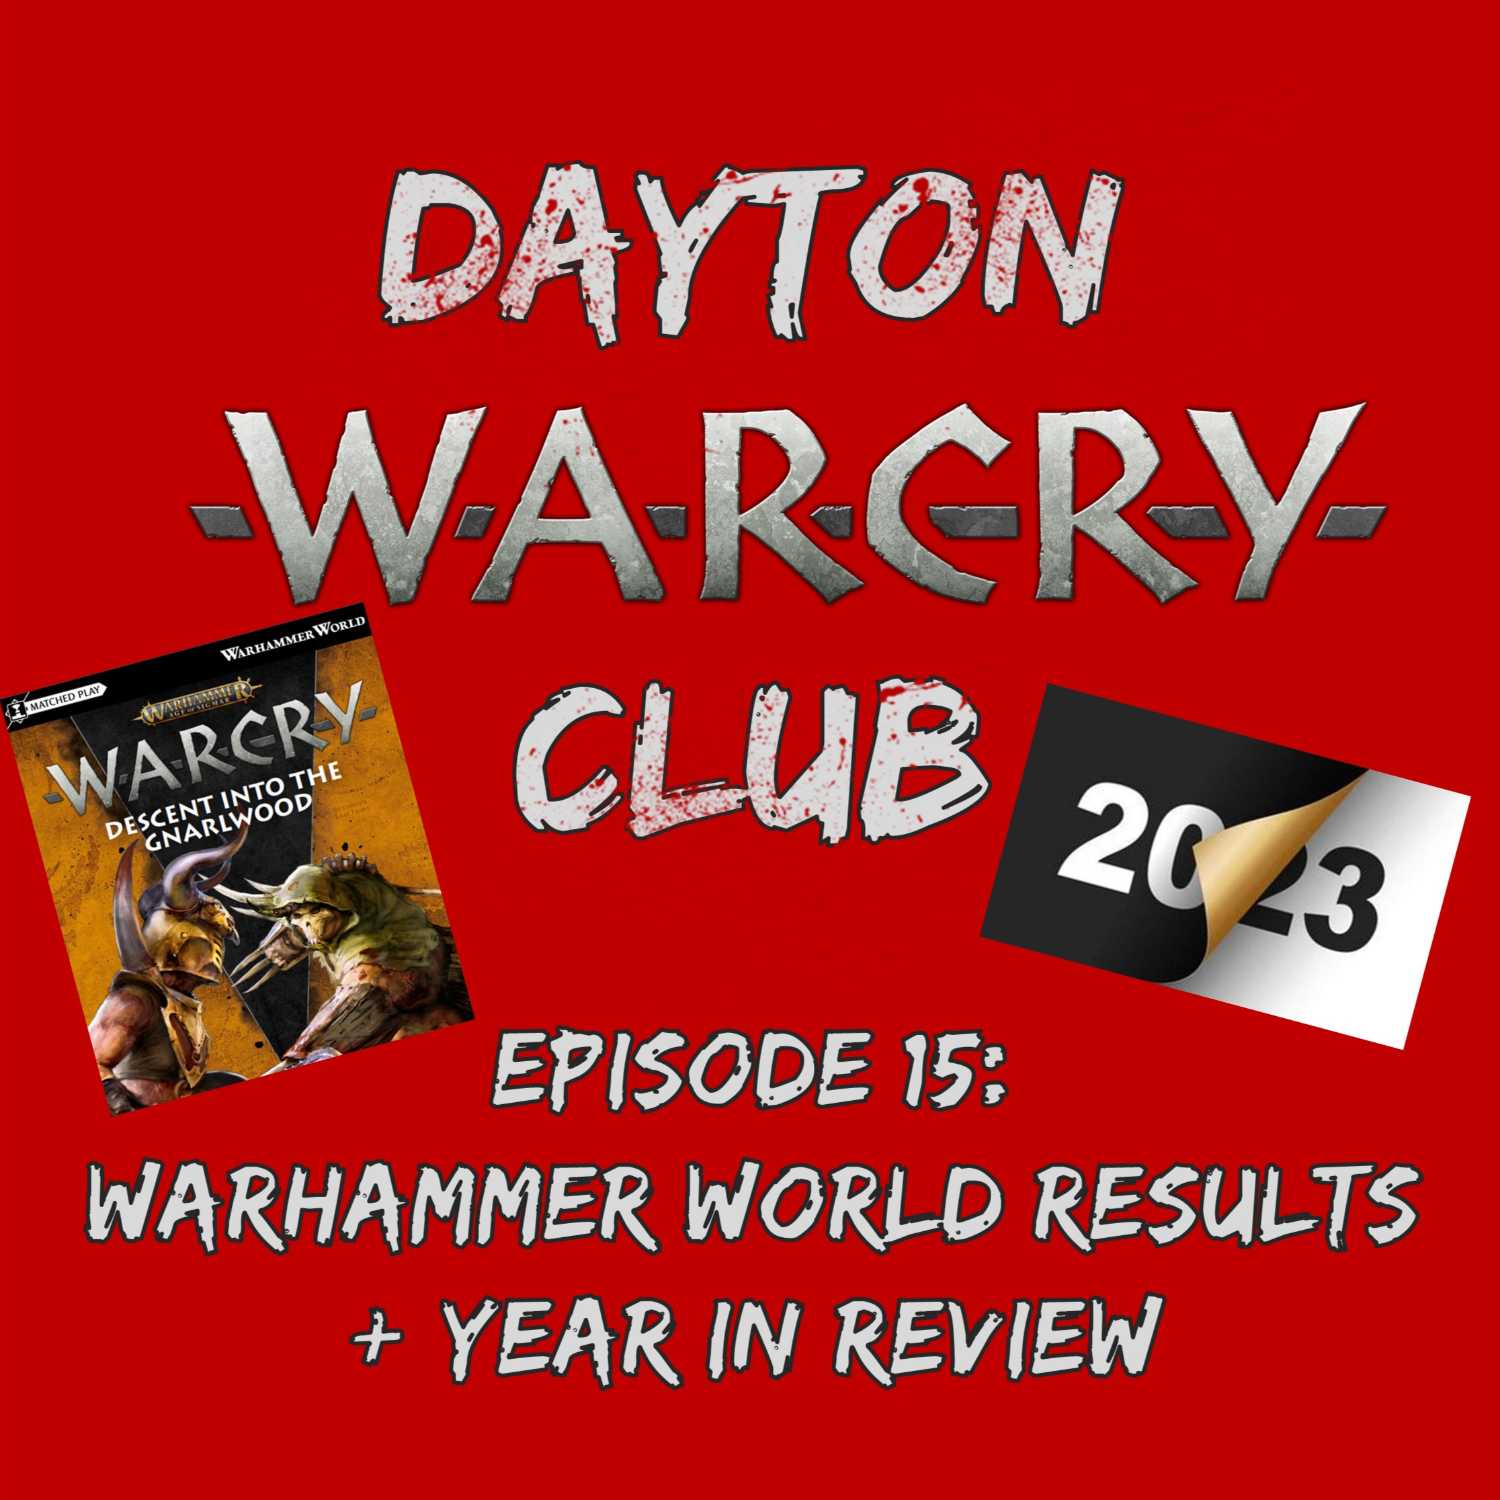 Dayton Warcry Club Episode 15: Warhammer World Results + Year in Review